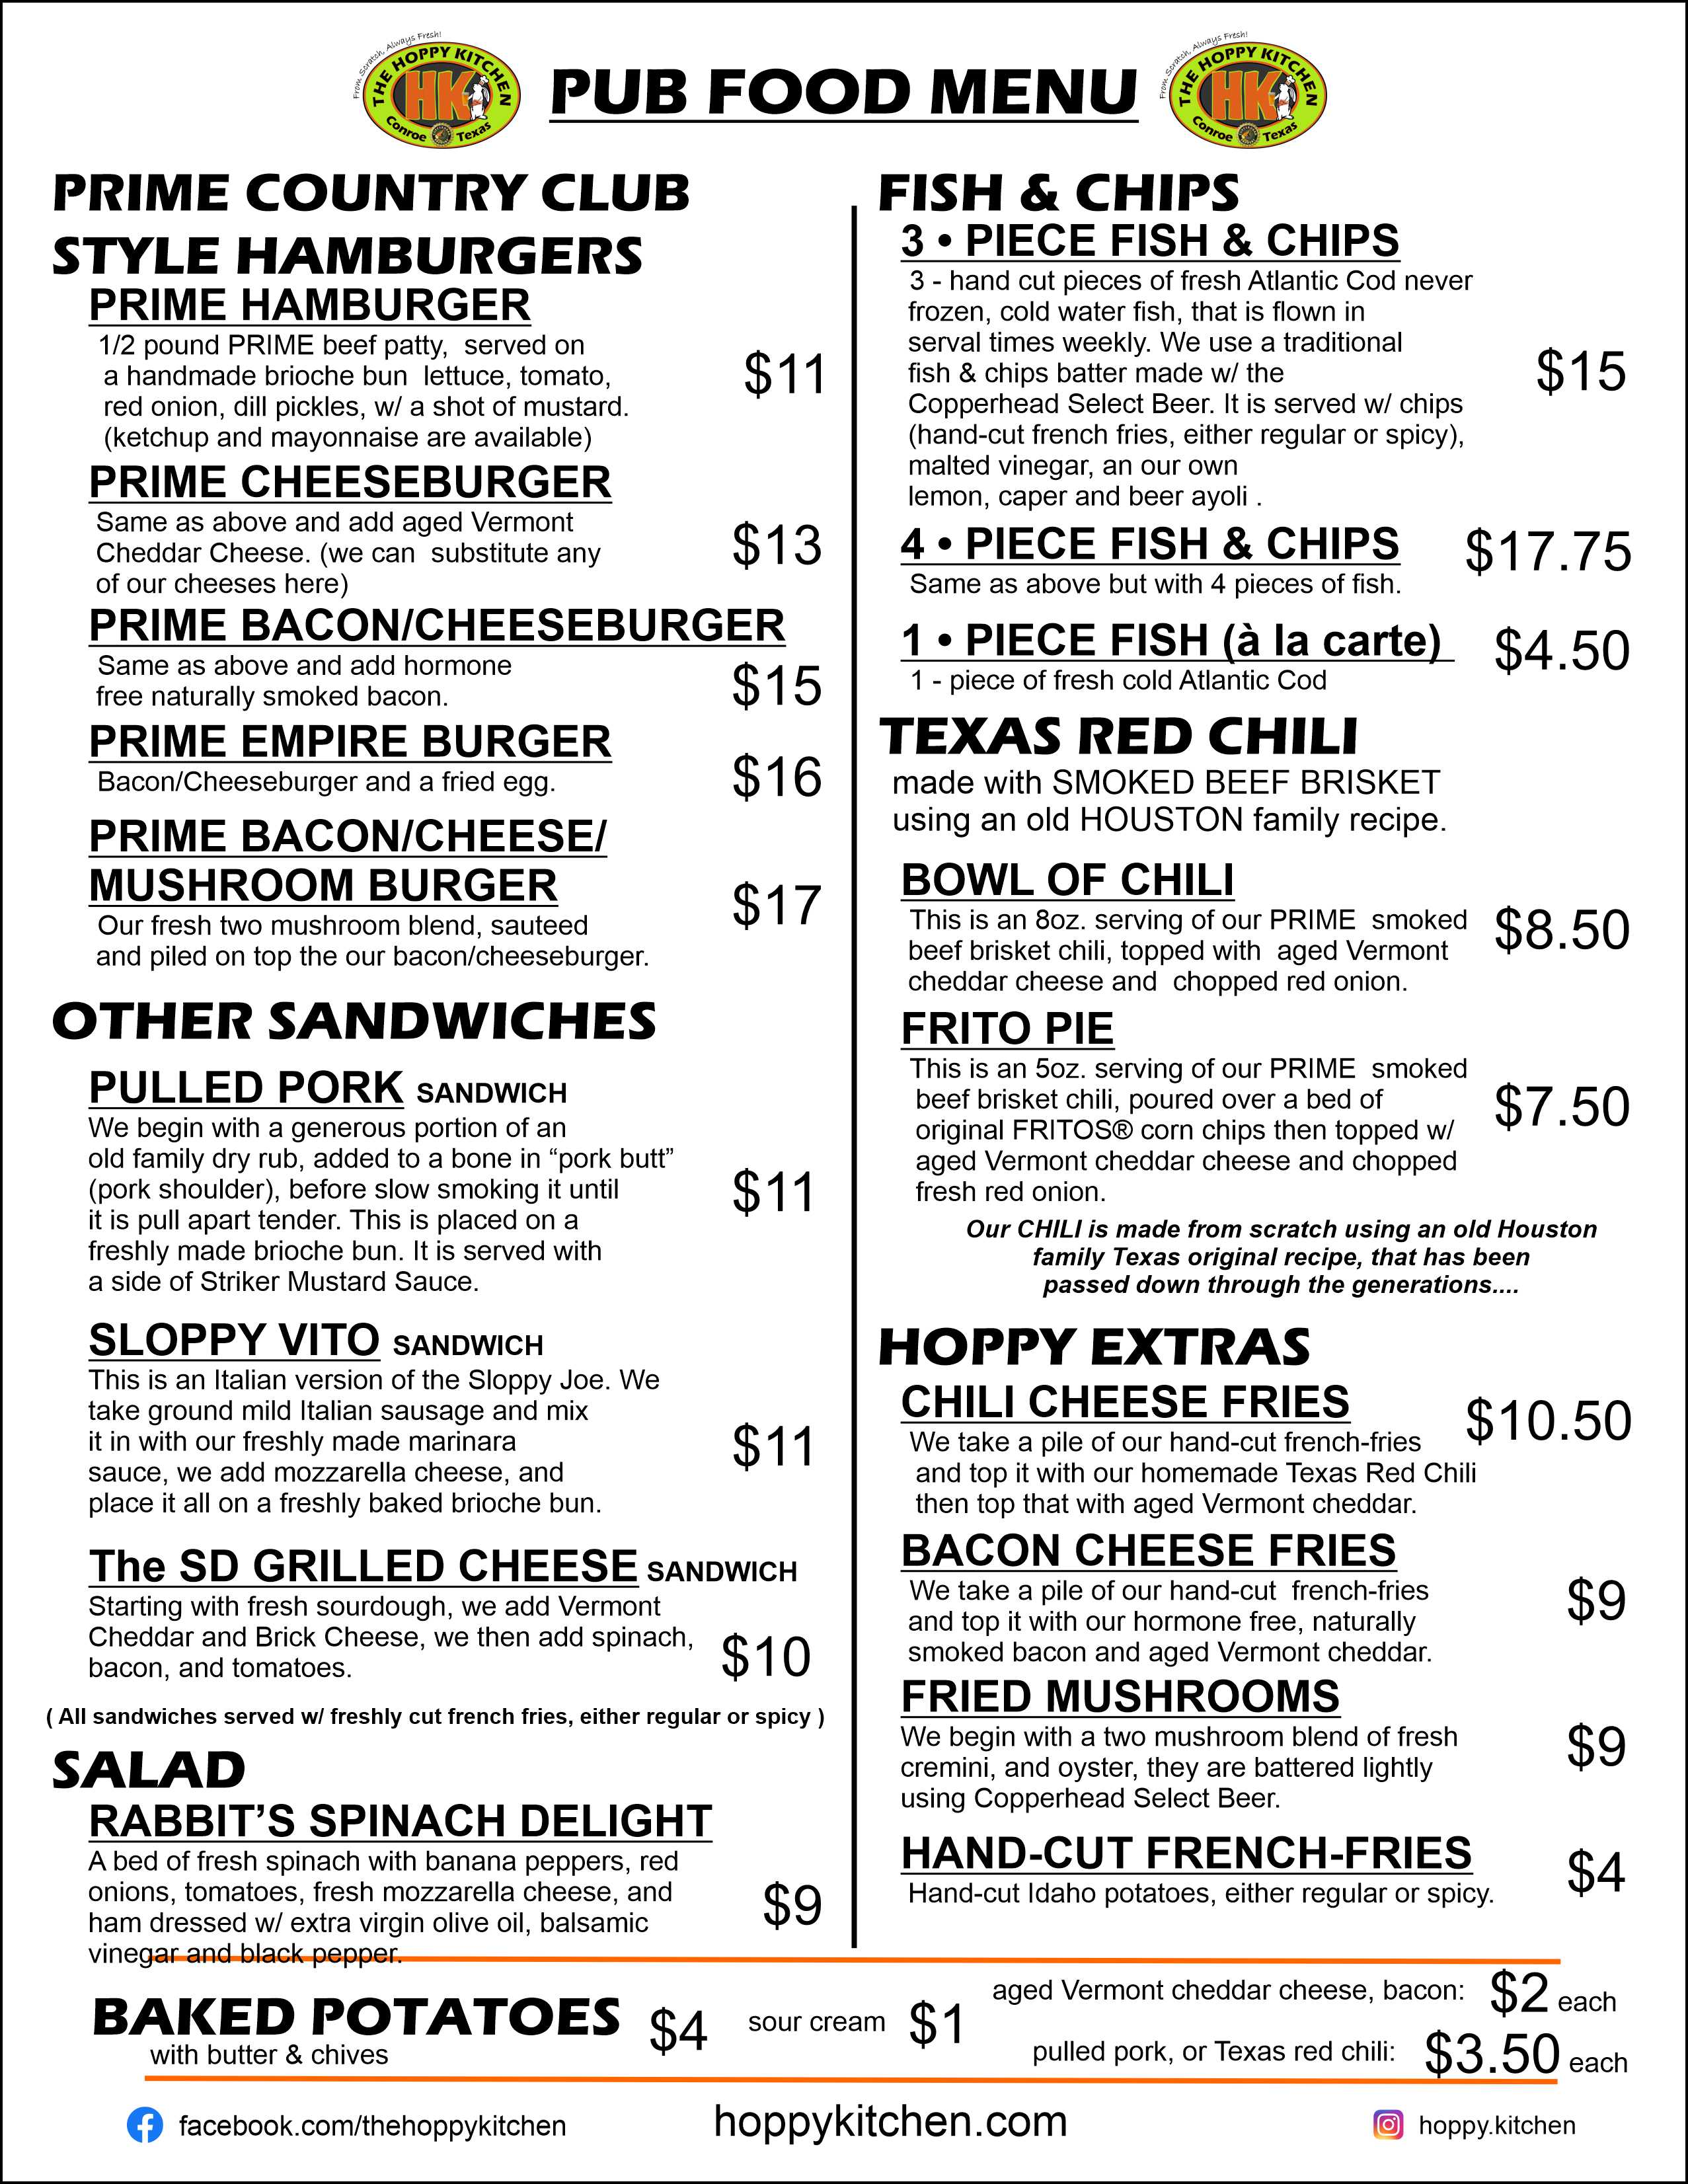 This is our Pub Food Menu  We offer Prime Countryclub style hamburgers, pulled pork sandwiches, a sloppy Vito sandwich, a grilled cheese sandwich, a spinach greek salad, baked potatoes, fish & chips, prime smoked beef brisket chili, frito pie, chili cheese fries, bacon cheese fries, fried mushrooms, poutine, and plain fries.